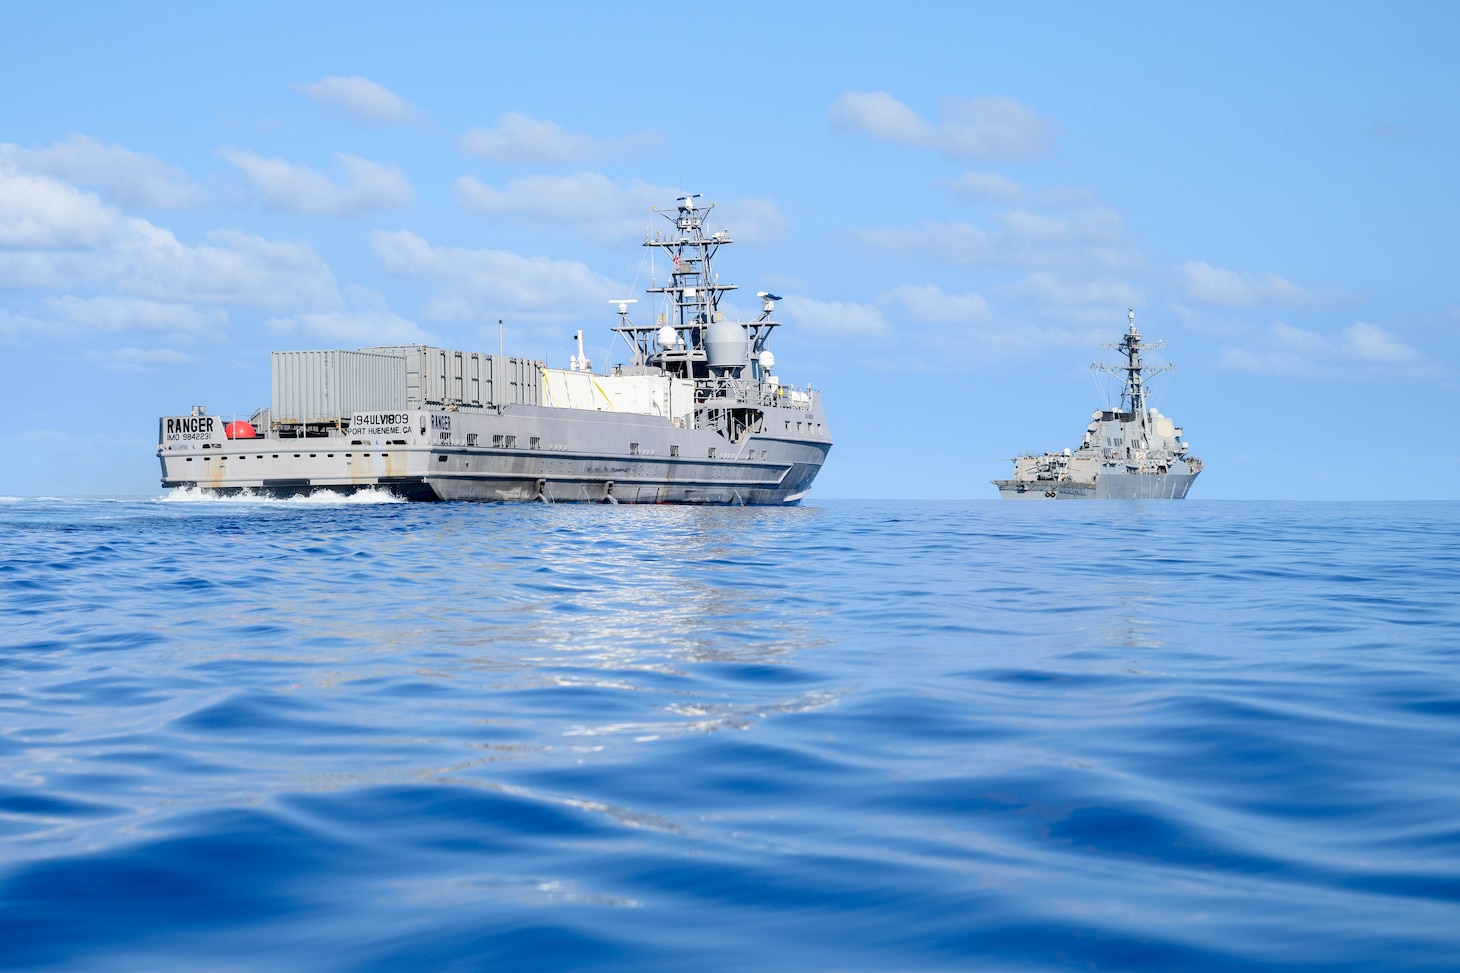 The unmanned surface vessel Ranger trails the Arleigh Burke-class guided-missile destroyer USS Shoup (DDG 86) as both ships transit the Pacific Ocean during Integrated Battle Problem (IBP) 23.2, Sep. 15, 2023. IBP 23.2 is a Pacific Fleet exercise to test, develop and evaluate the integration of unmanned platforms into fleet operations to create warfighting advantages. (U.S. Navy photo by Mass Communication Specialist 2nd Class Jesse Monford)